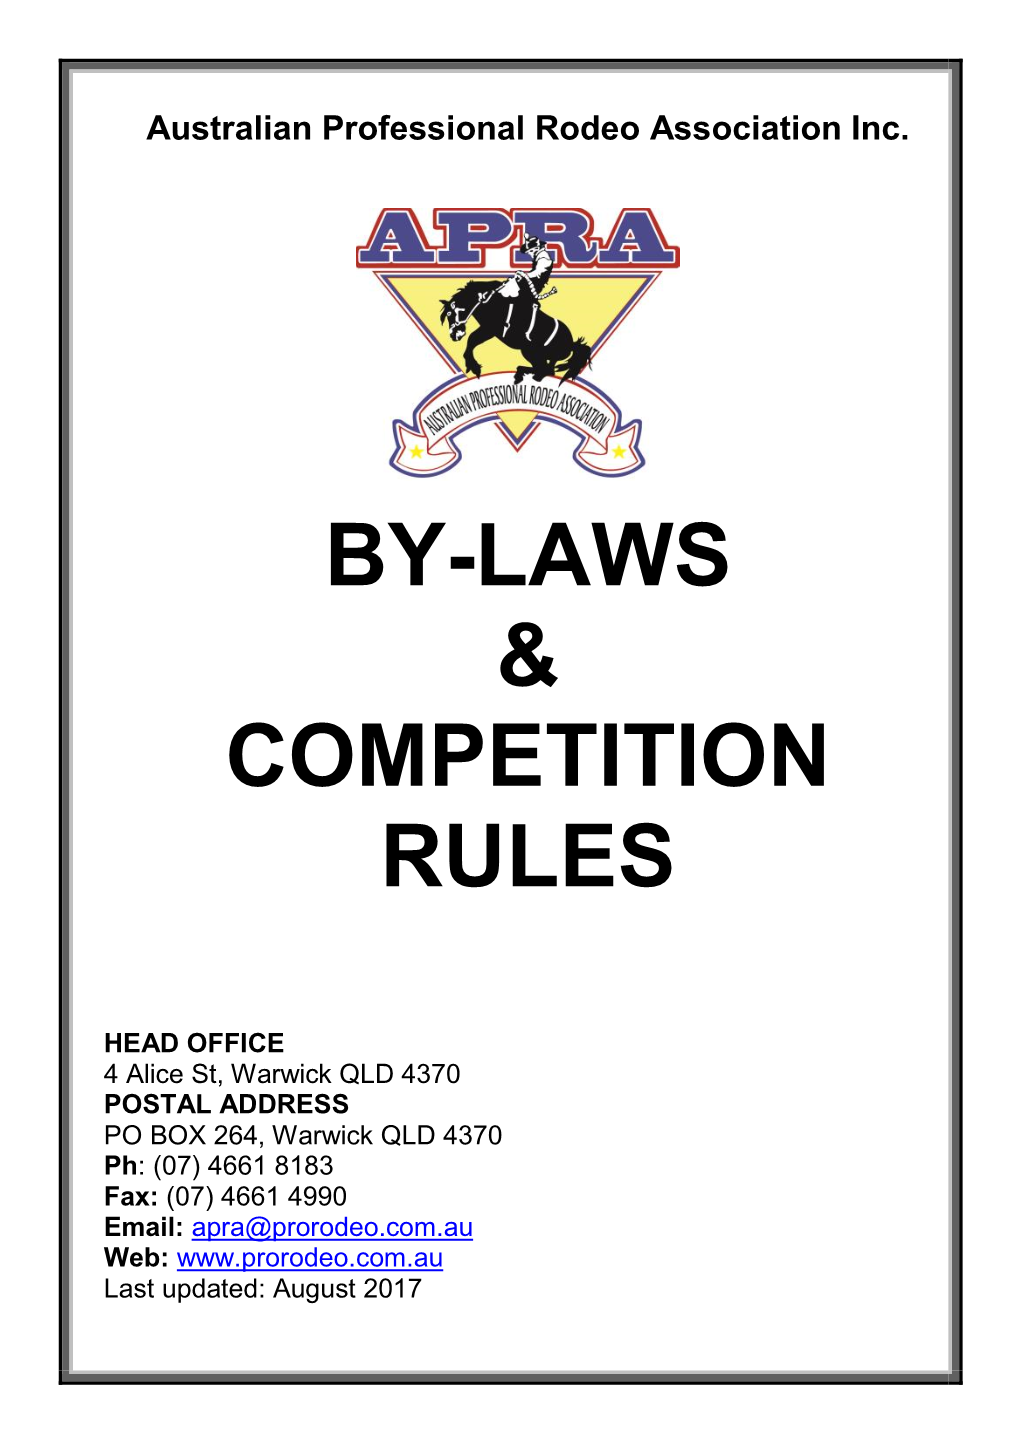 By-Laws & Competition Rules